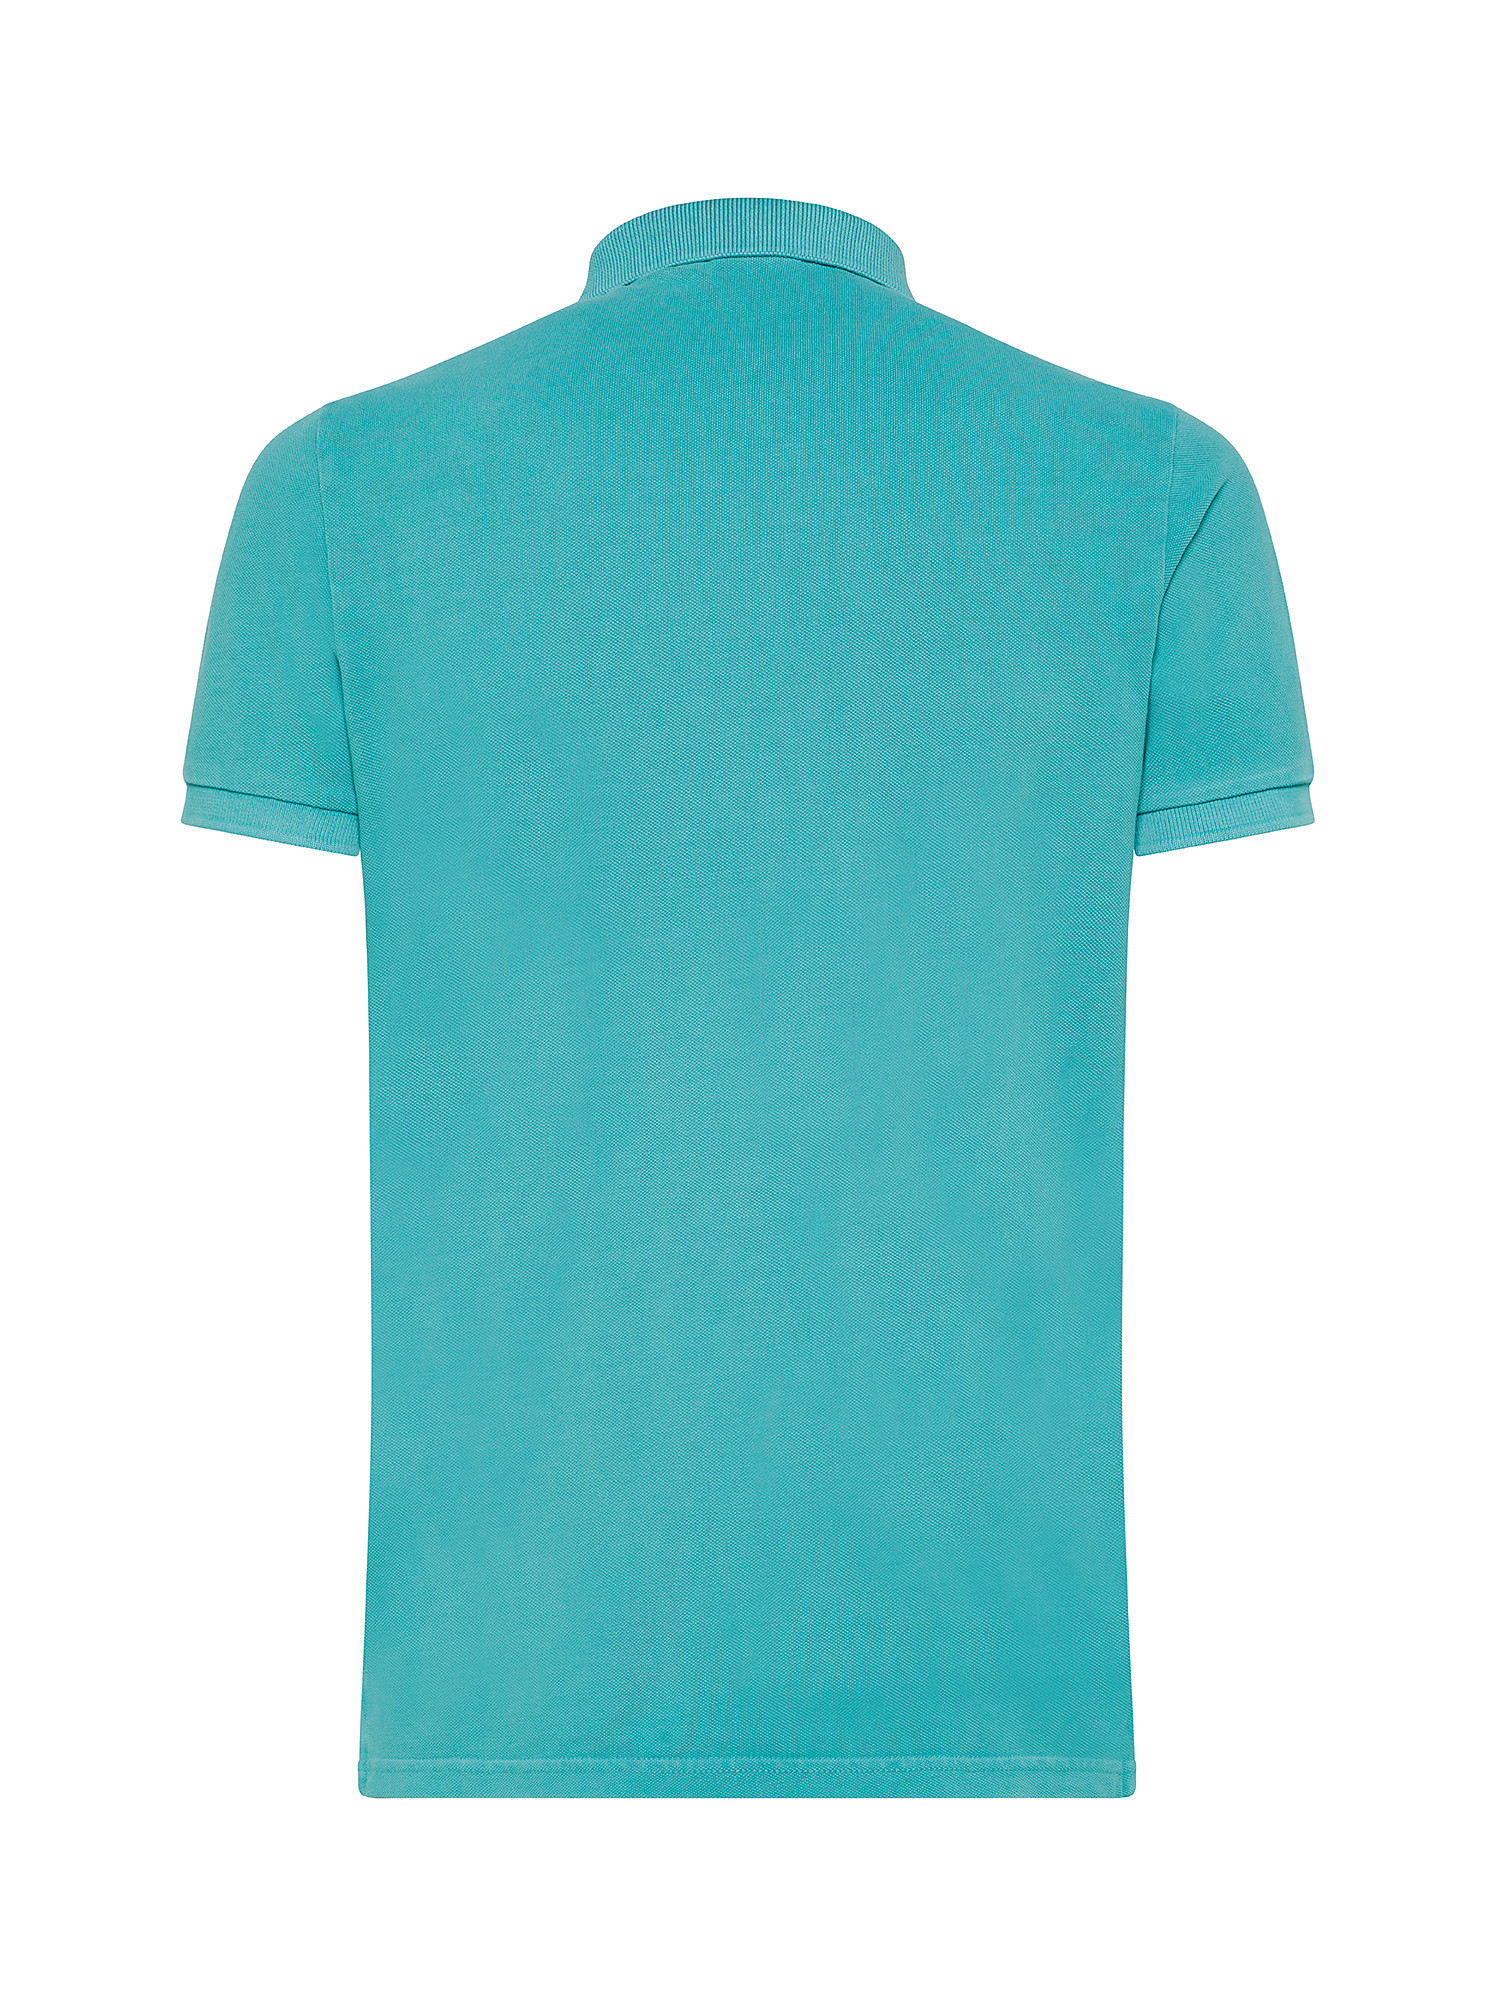 Superdry - Polo in cotone piquet con logo, Azzurro, large image number 1